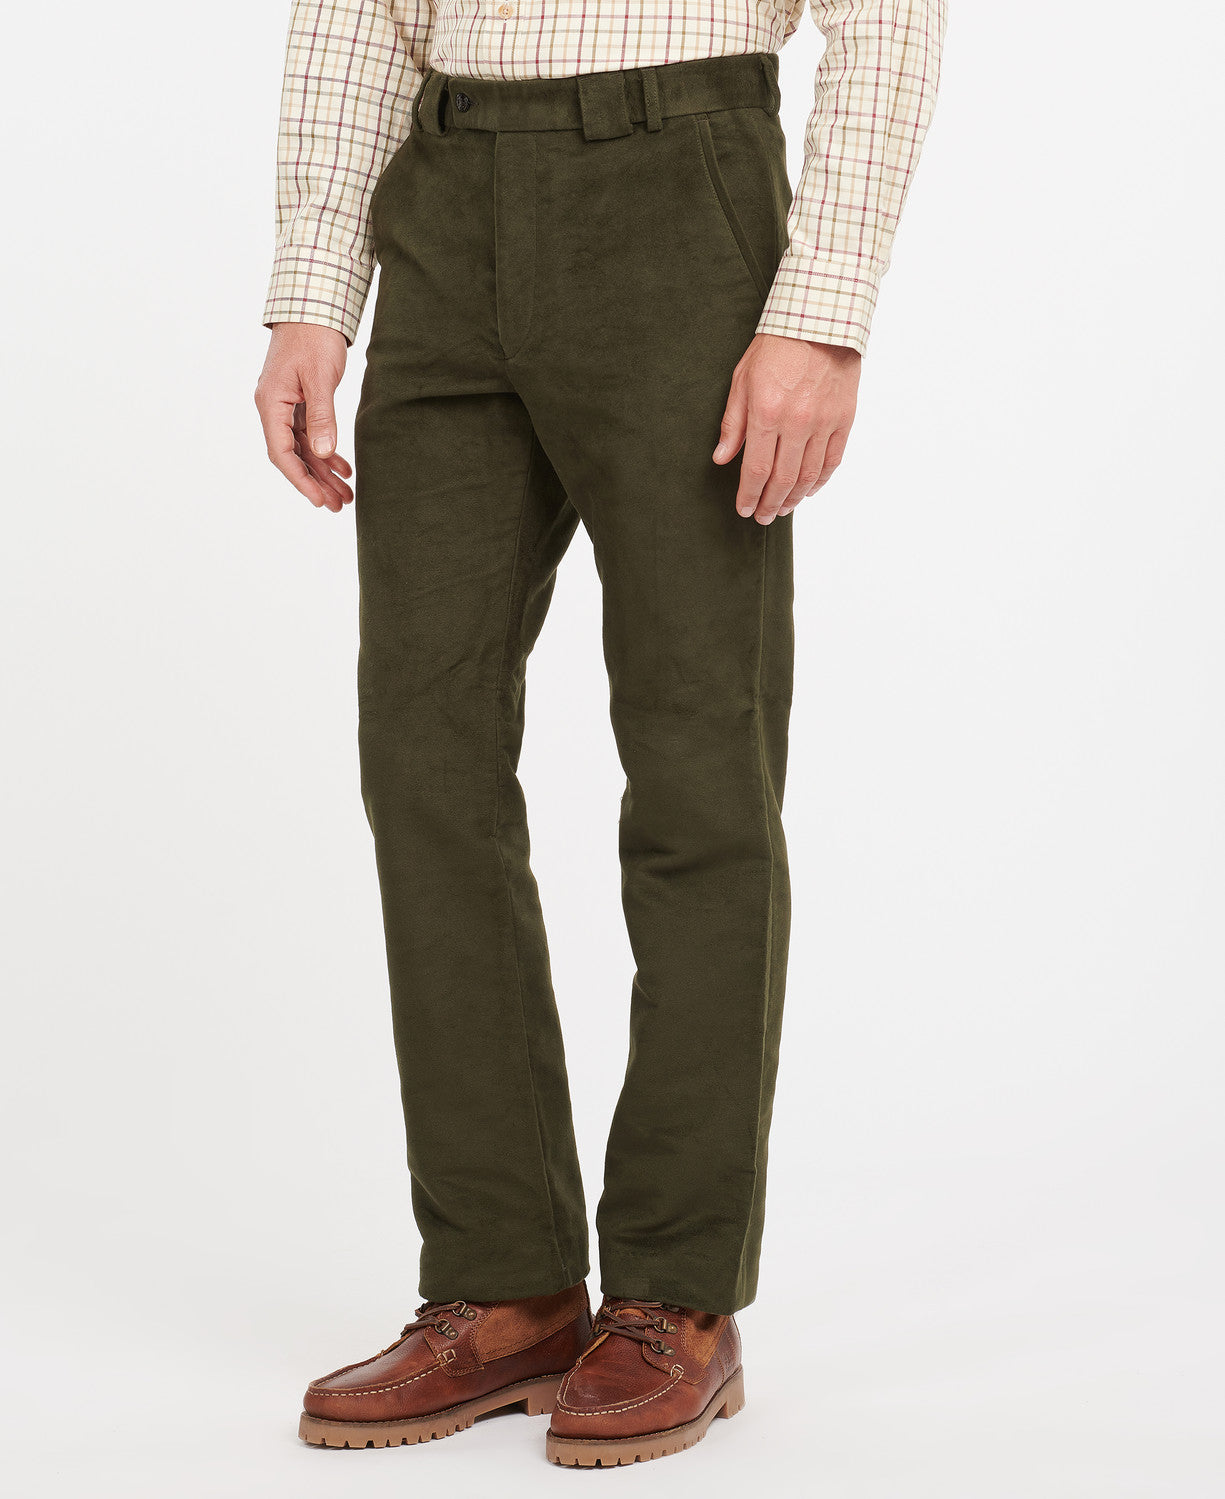 Barbour Traditional Fit Moleskin Trousers | Barbour Trousers – Sam ...